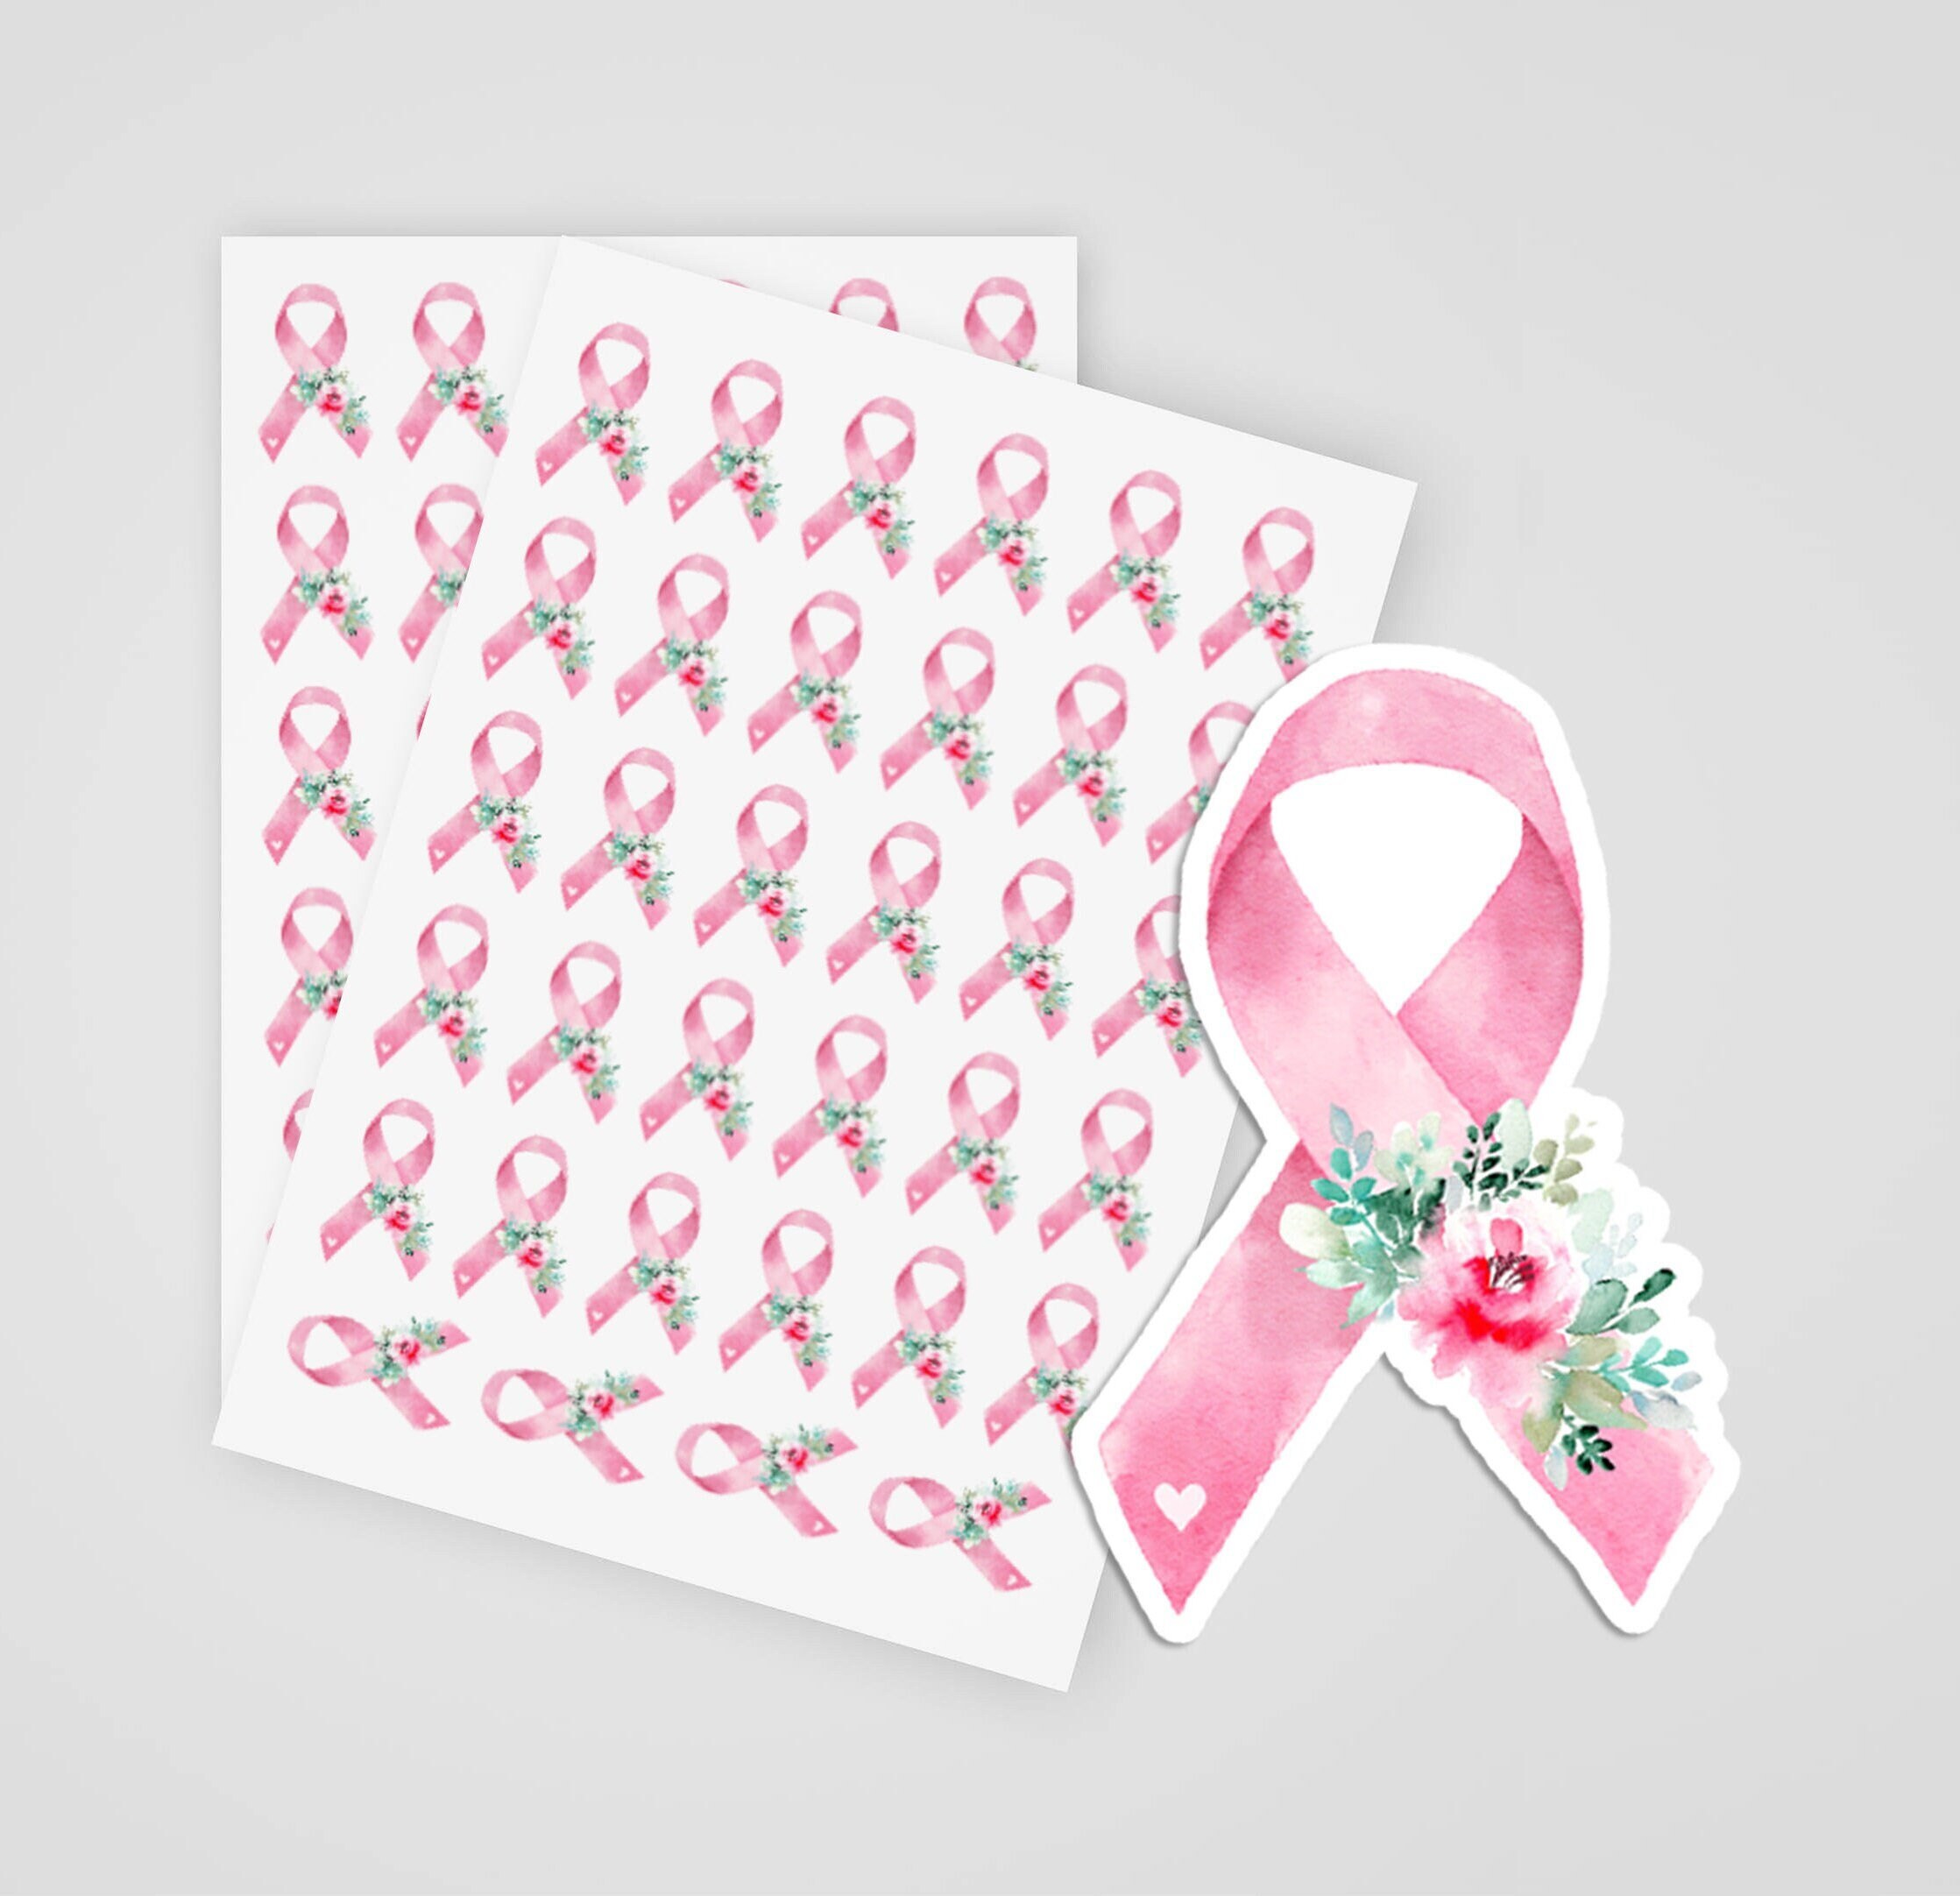 Breast Cancer Awareness Ribbon Pink Sticker for Sale by ohmydesign